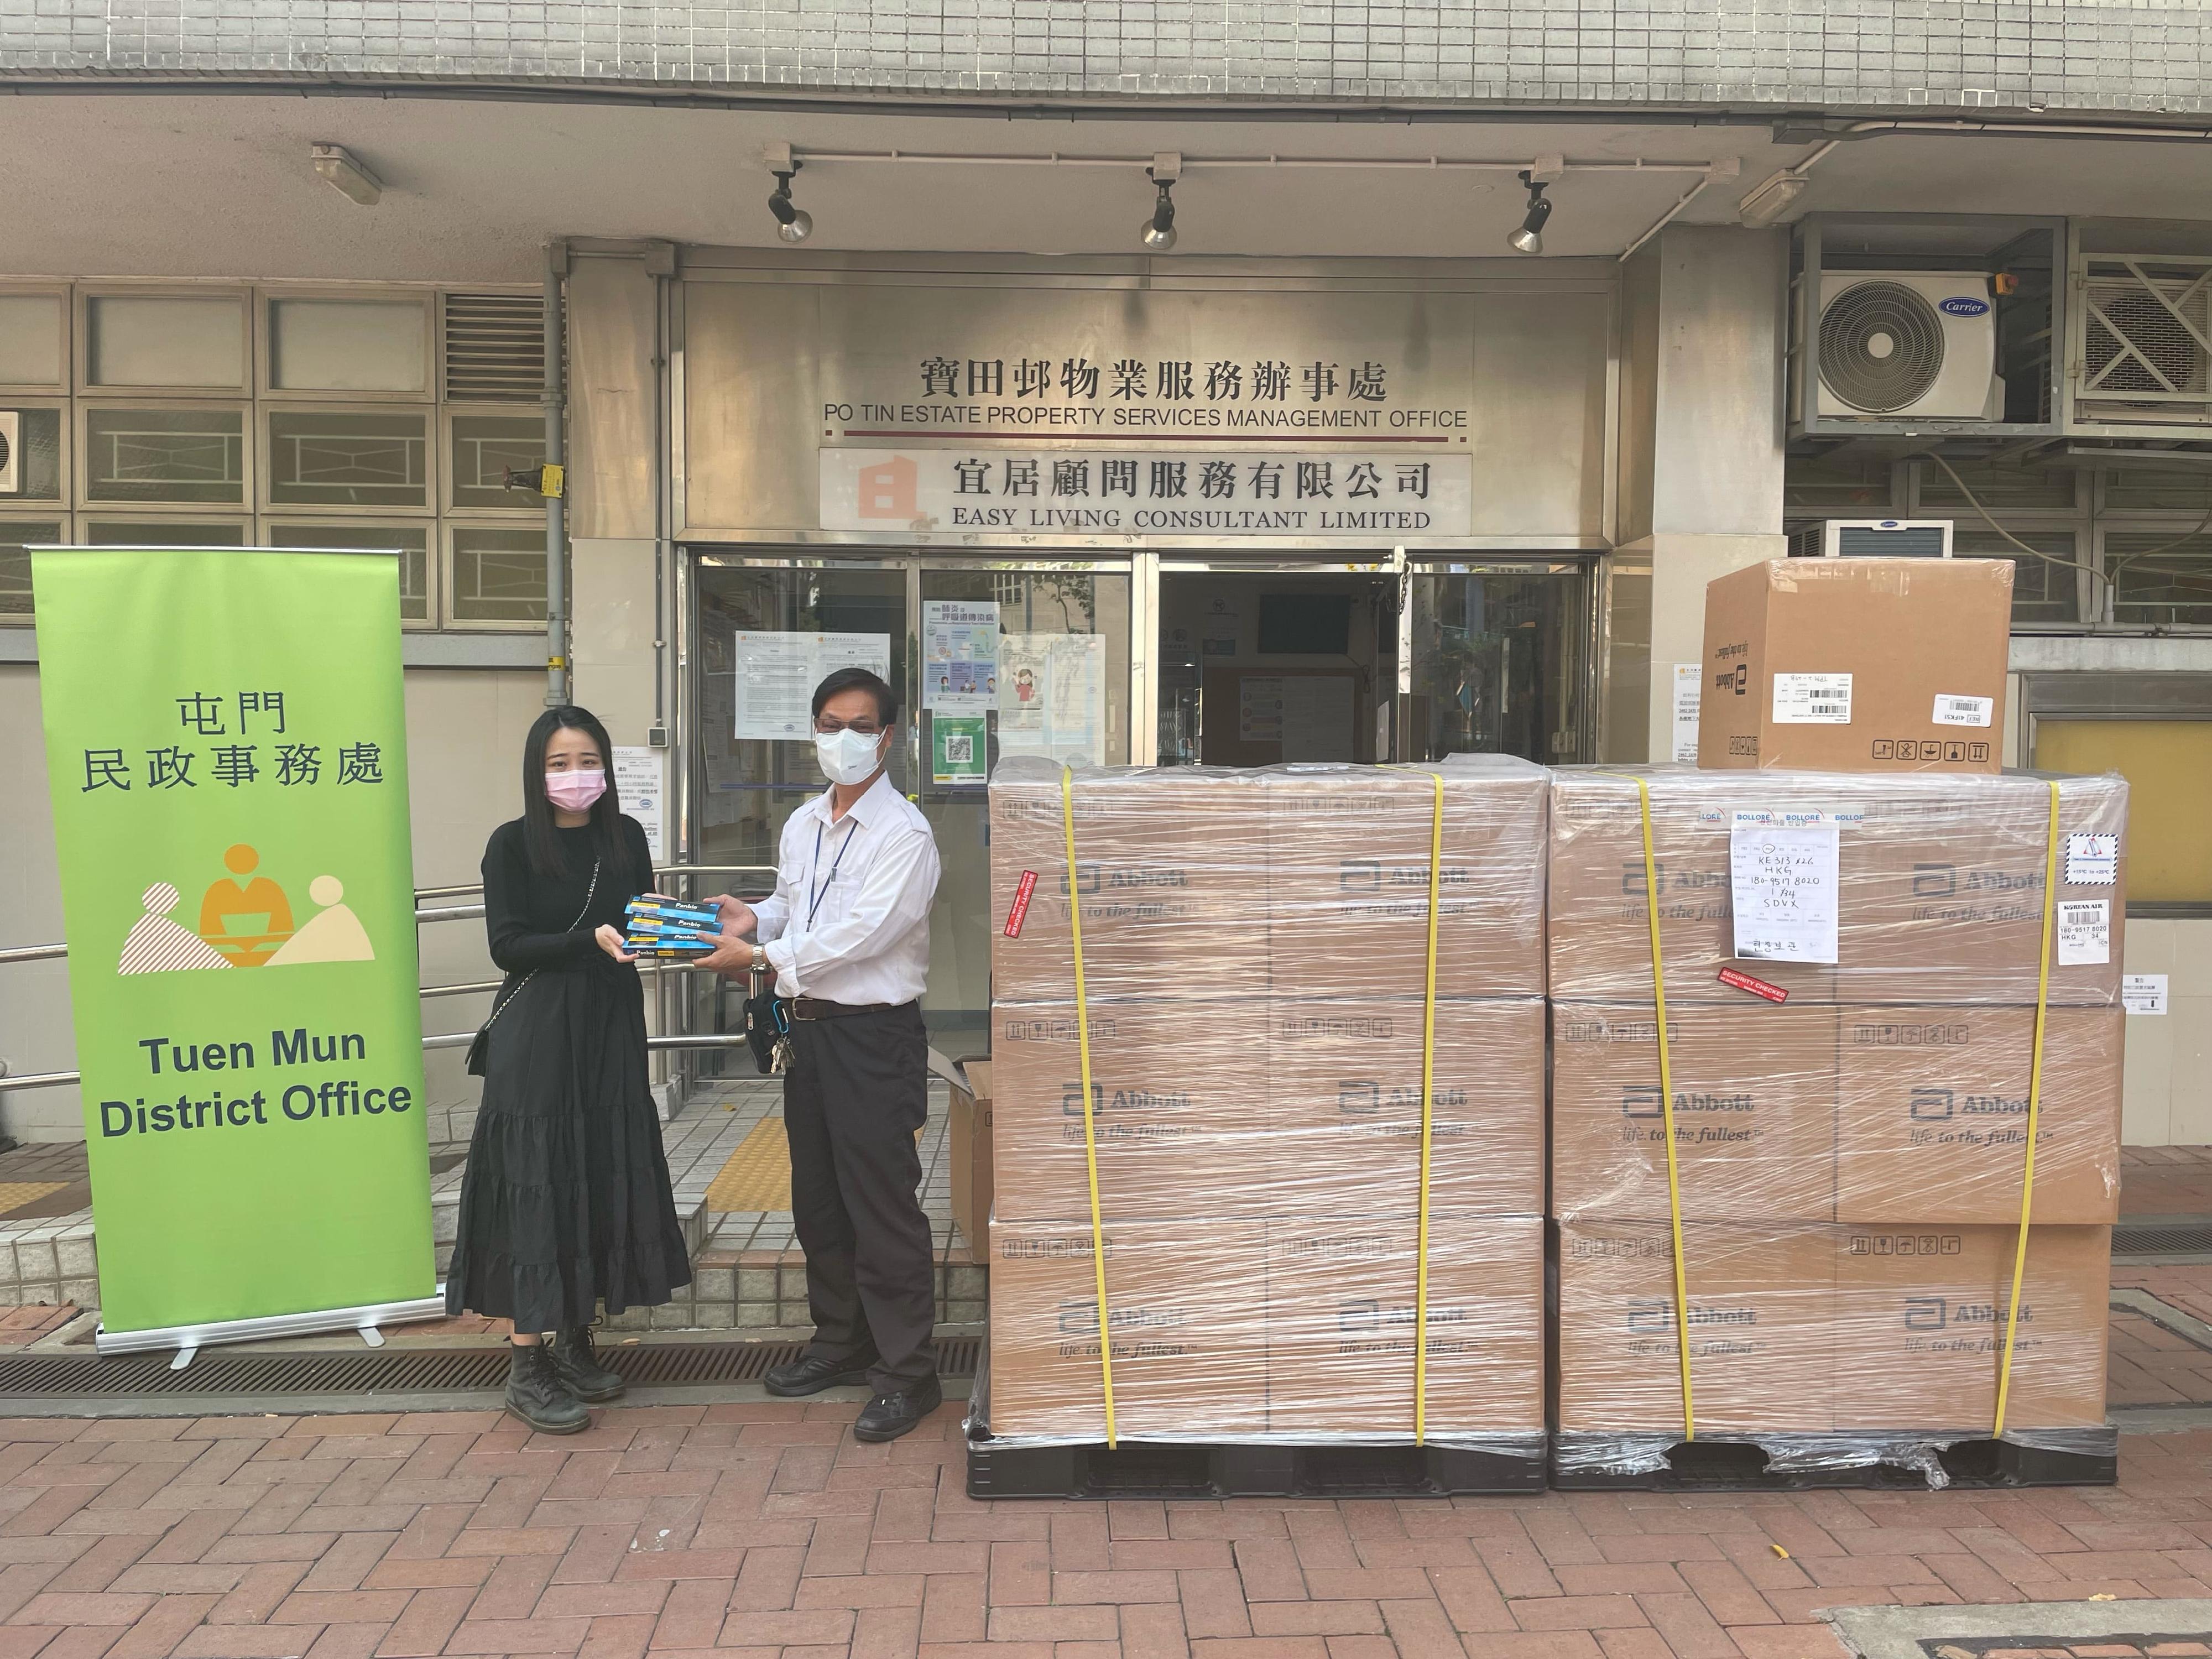 The Tuen Mun District Office today (March 13) distributed COVID-19 rapid test kits to households, cleansing workers and property management staff living and working in Po Tin Estate for voluntary testing through the property management company.